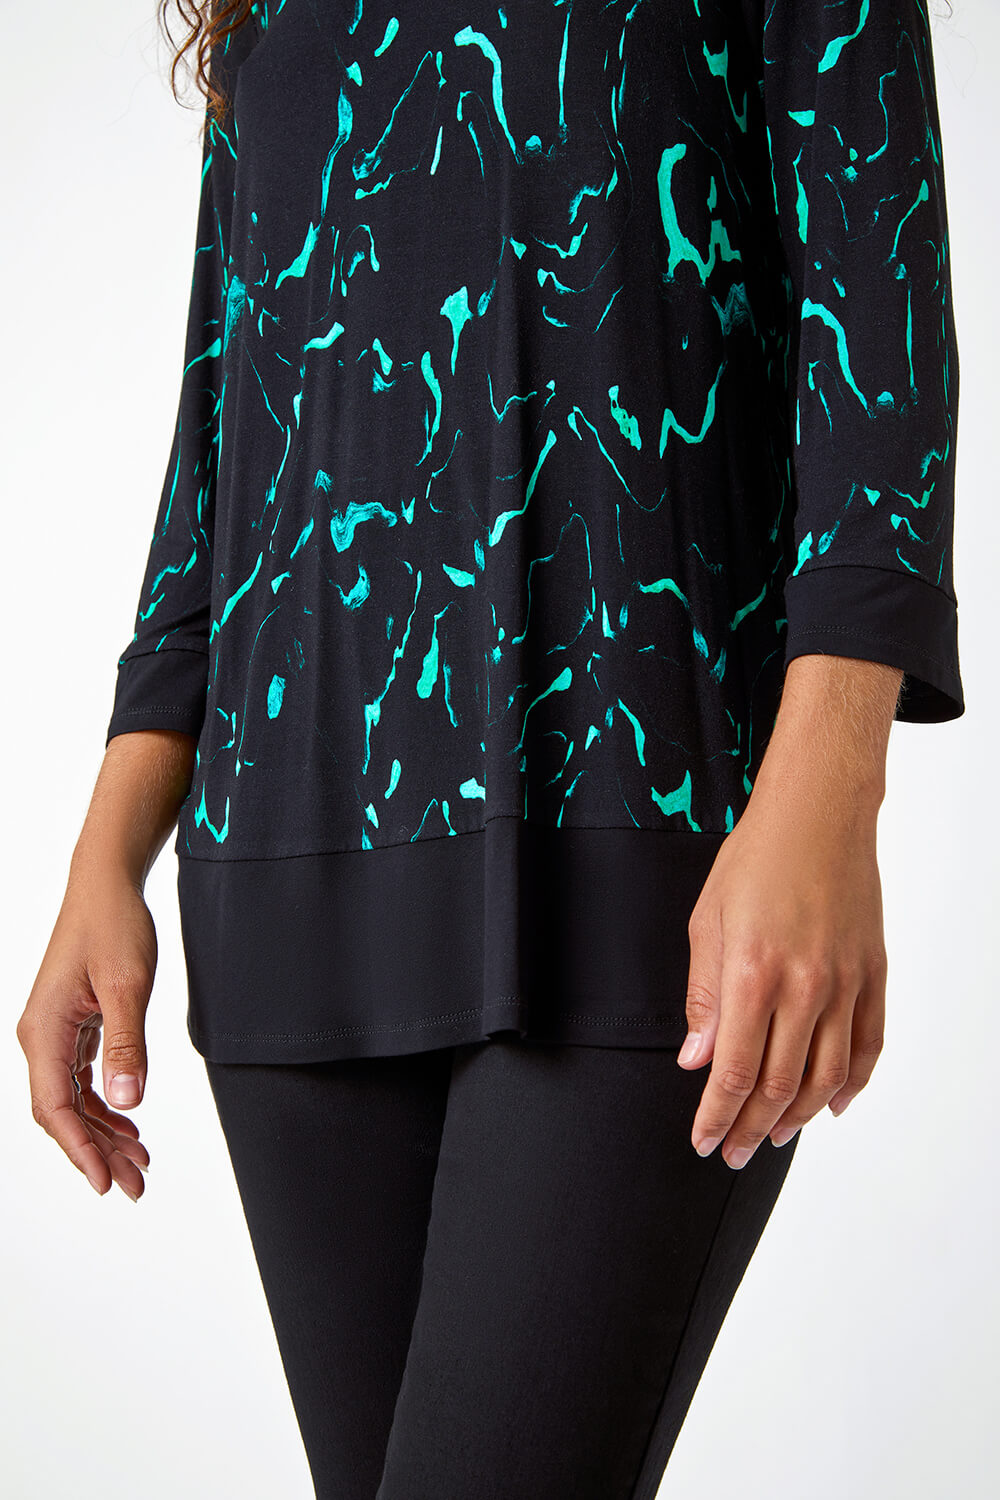 Green Marble Print Contrast Hem Stretch Top, Image 5 of 5